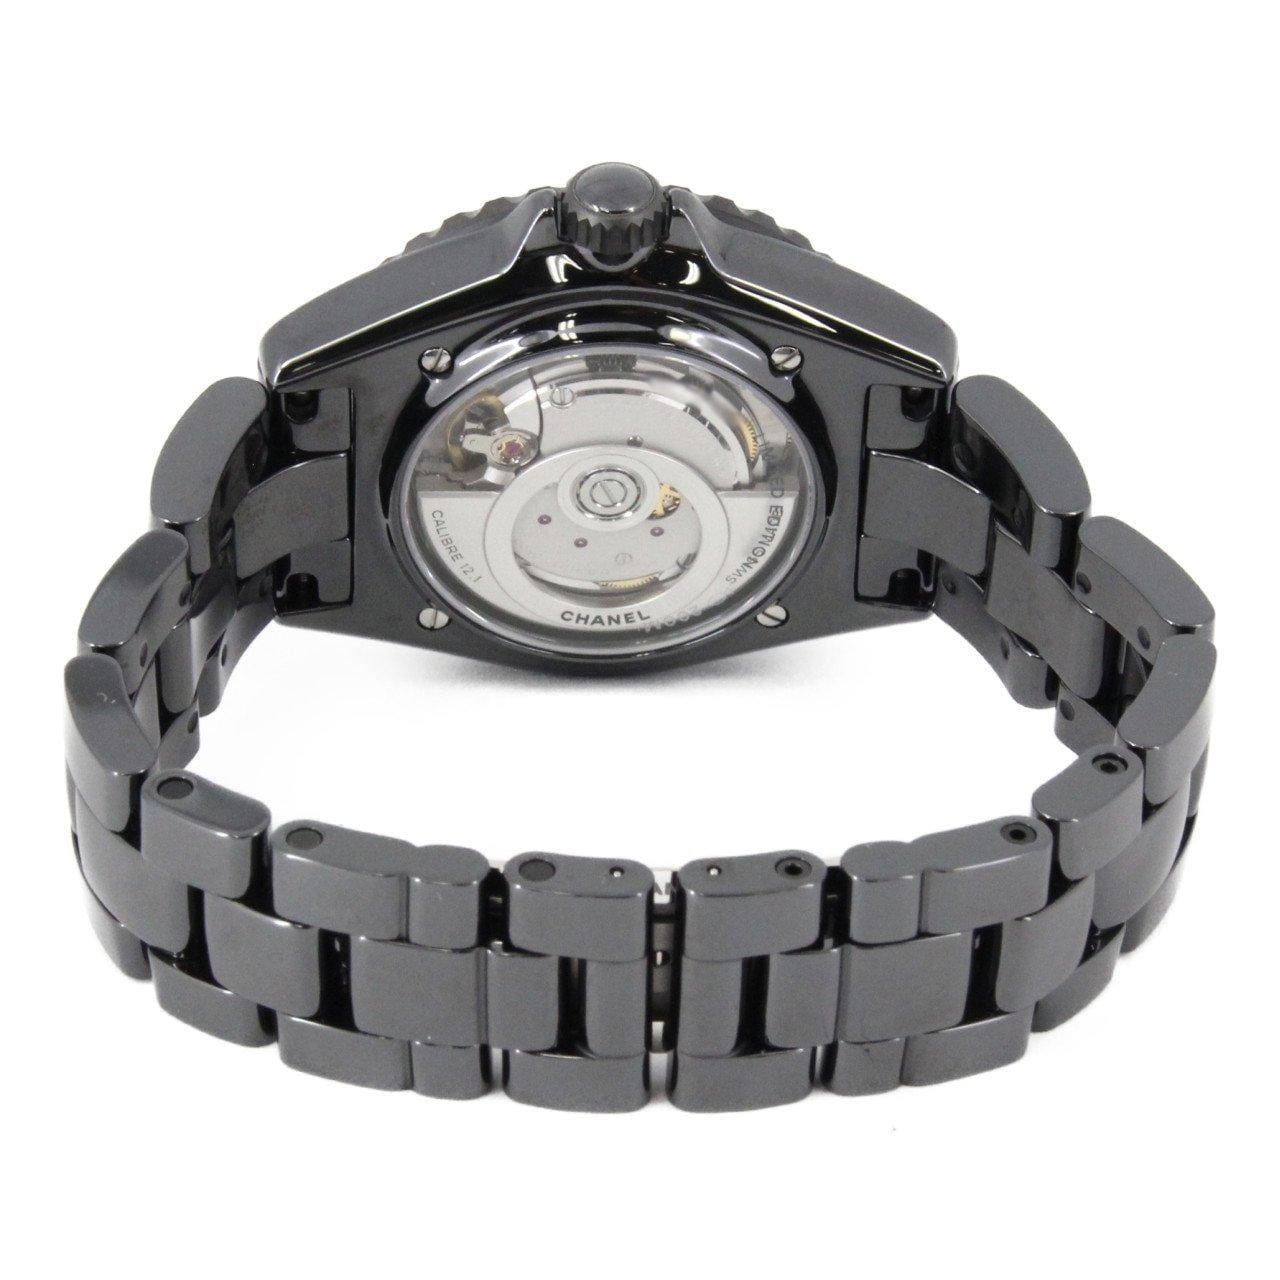 CHANEL J12 Wanted Du CHANEL 38mm Ceramic LIMITED H7418 陶瓷自动上弦